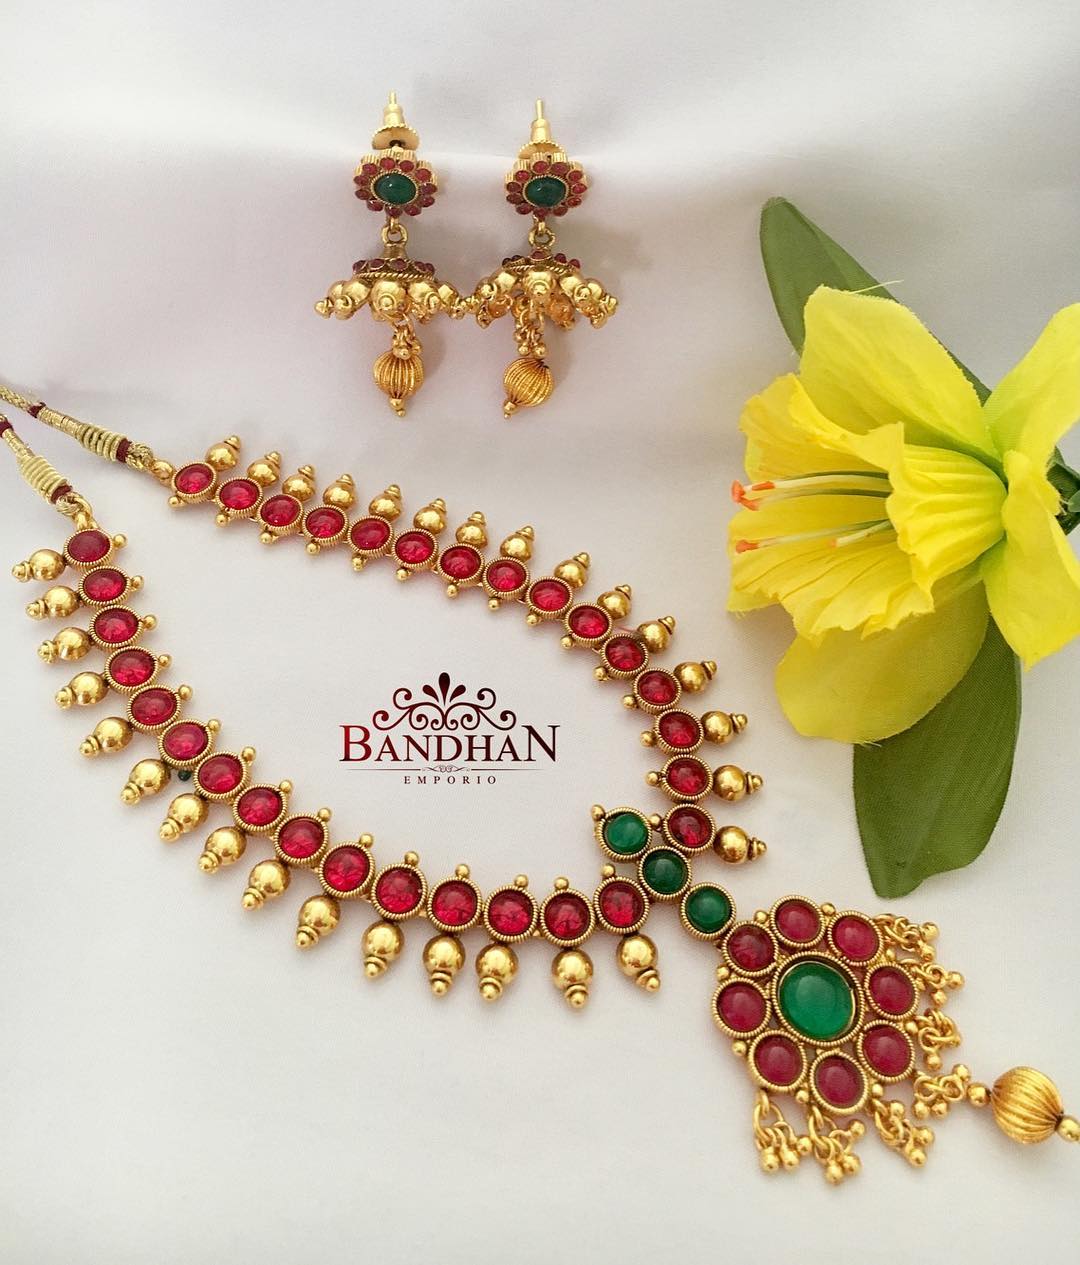 Irresistible Ruby necklace From Bandhan